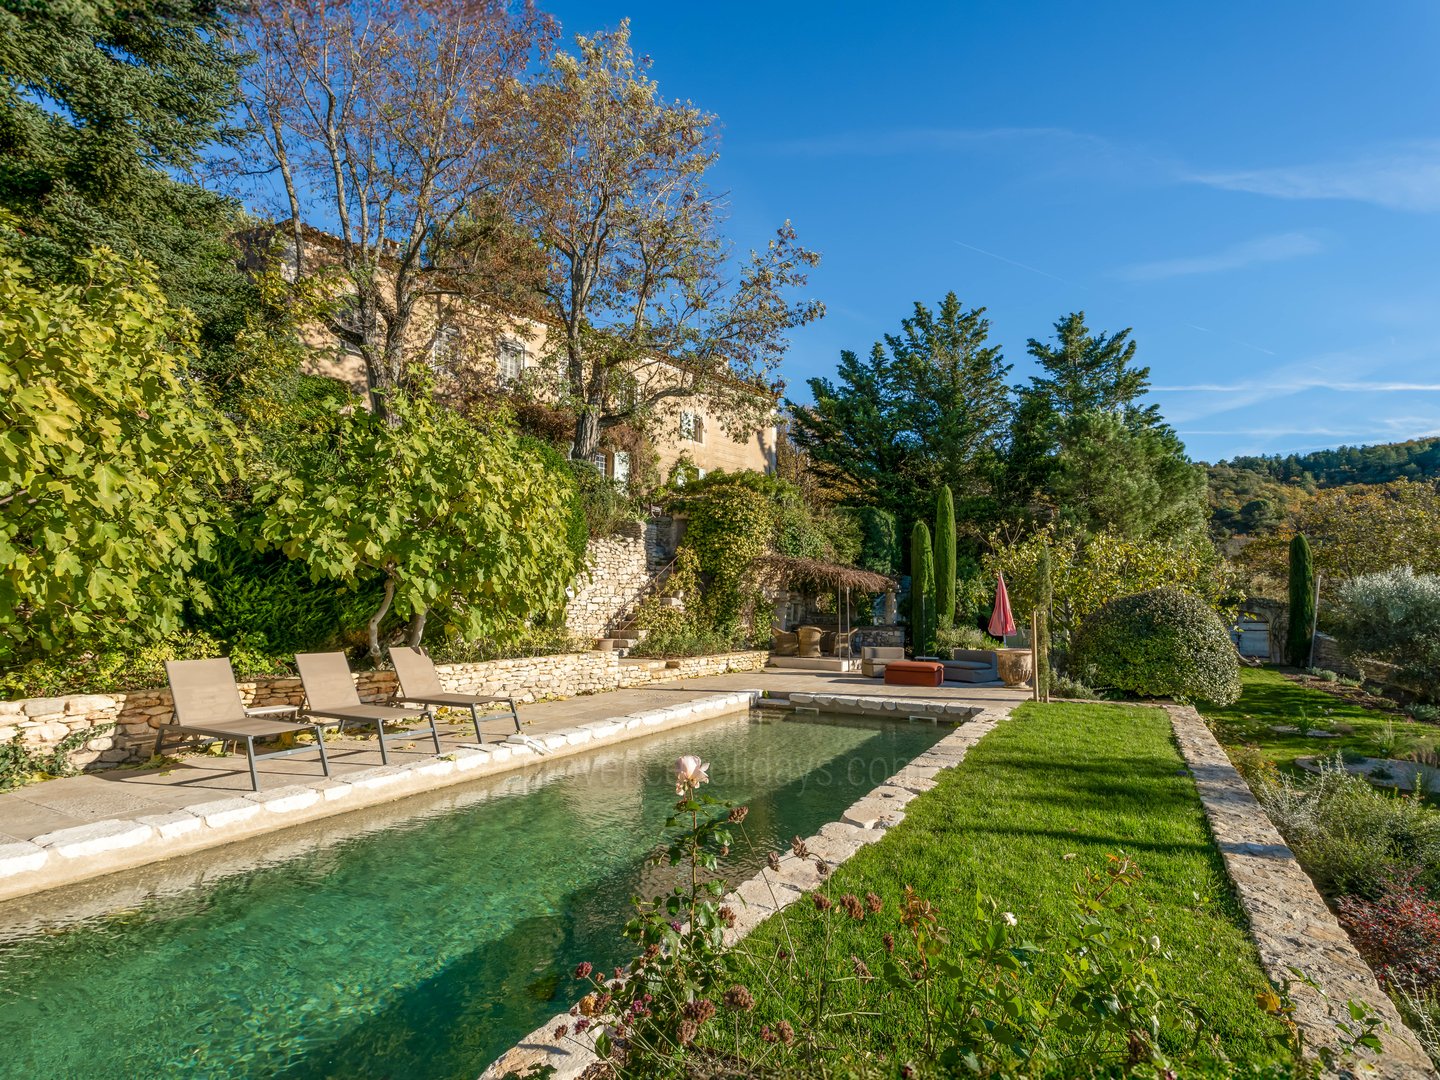 18th century Bastide with views of Luberon for sale - Bonnieux - 14